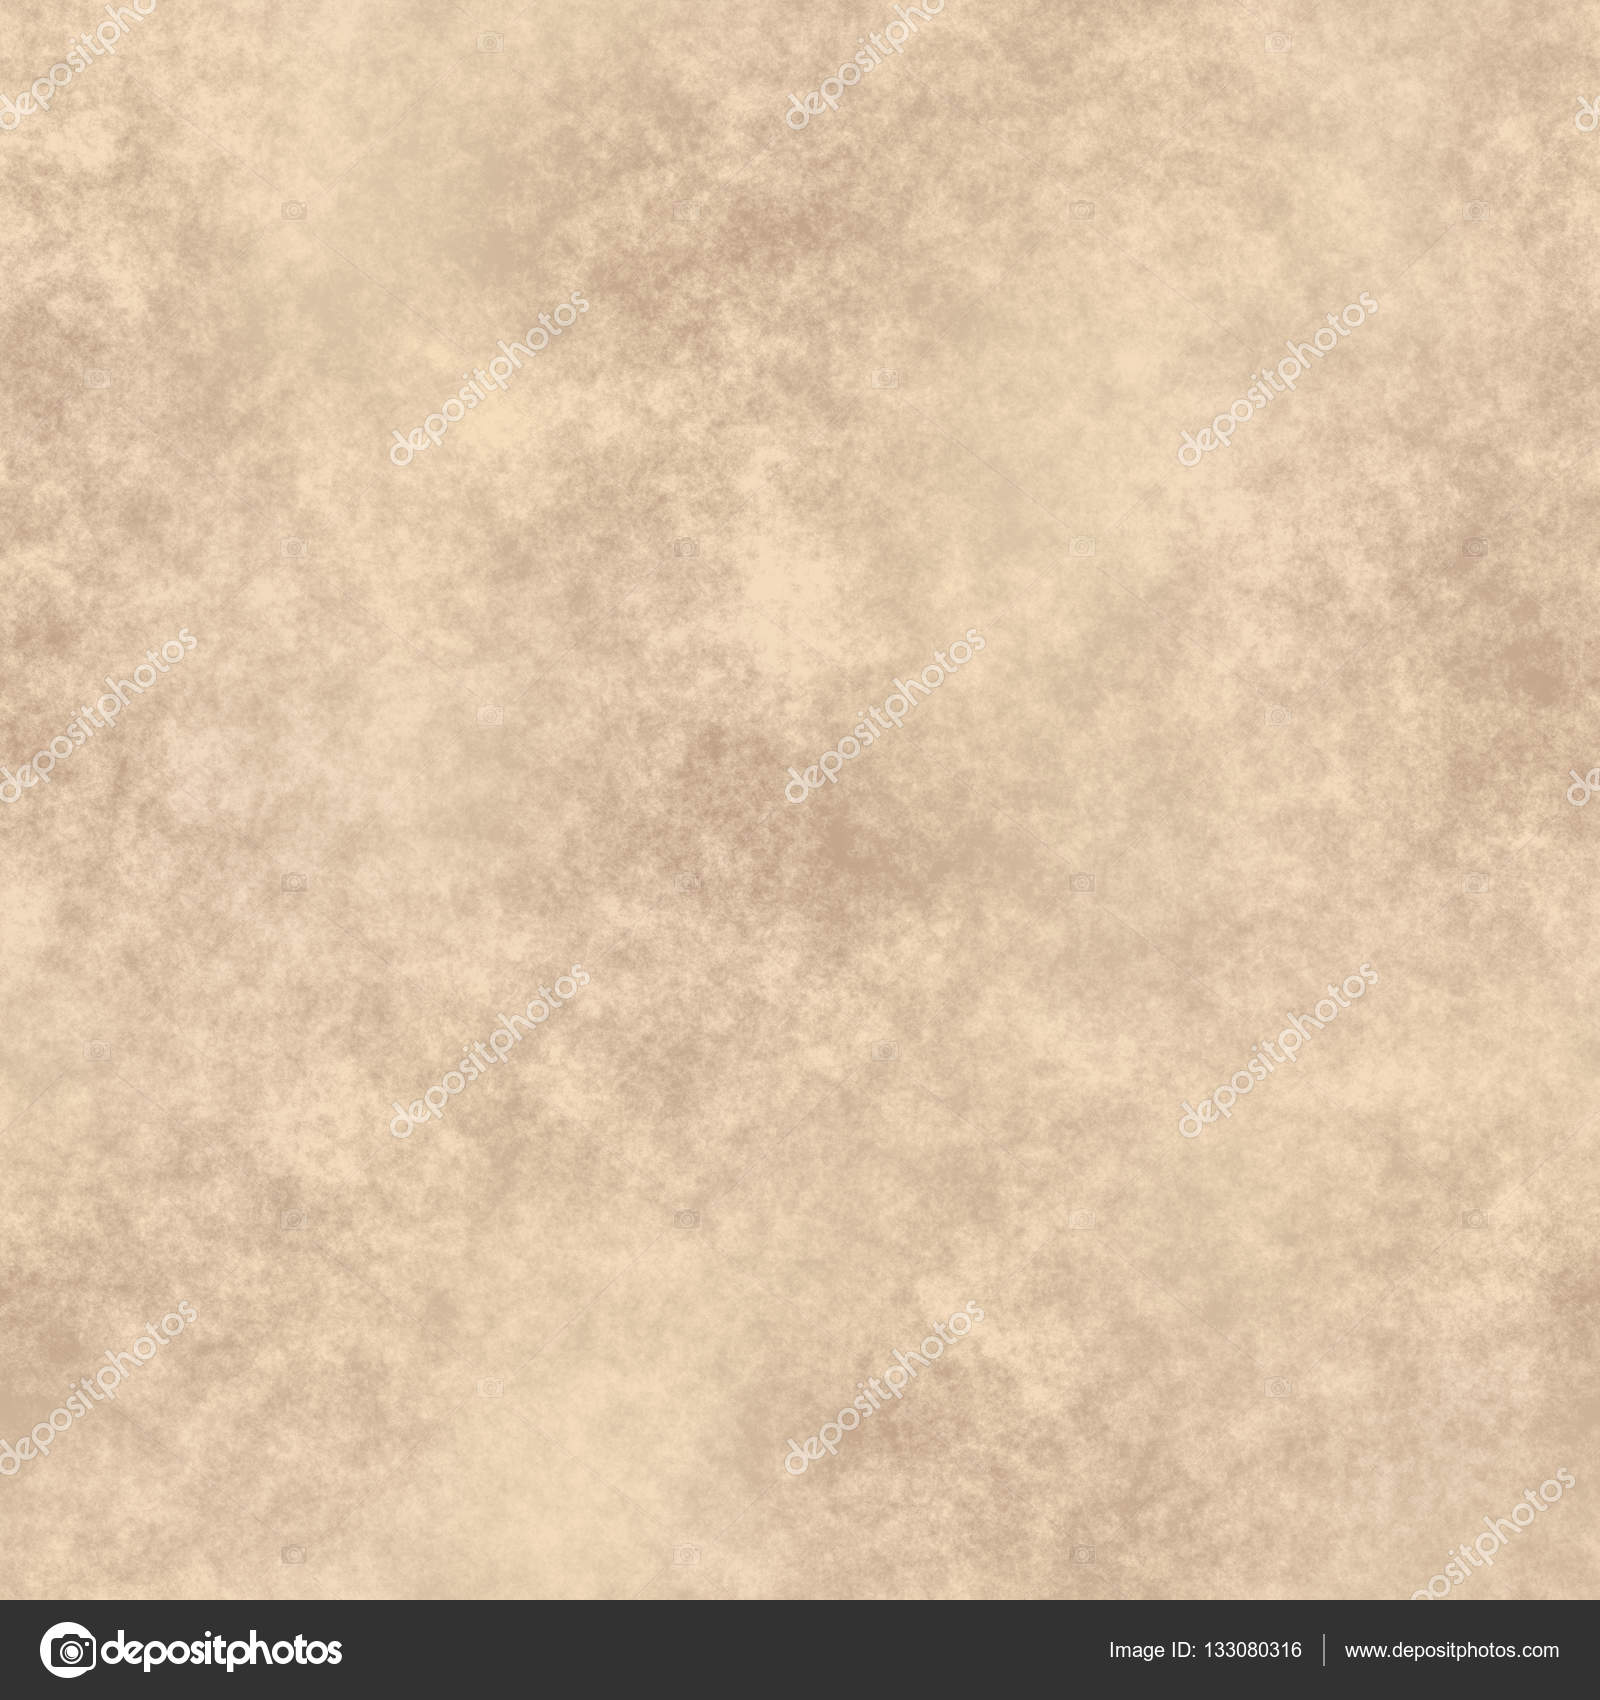 Seamless light wall texture or background. Beige wall surface. D ...